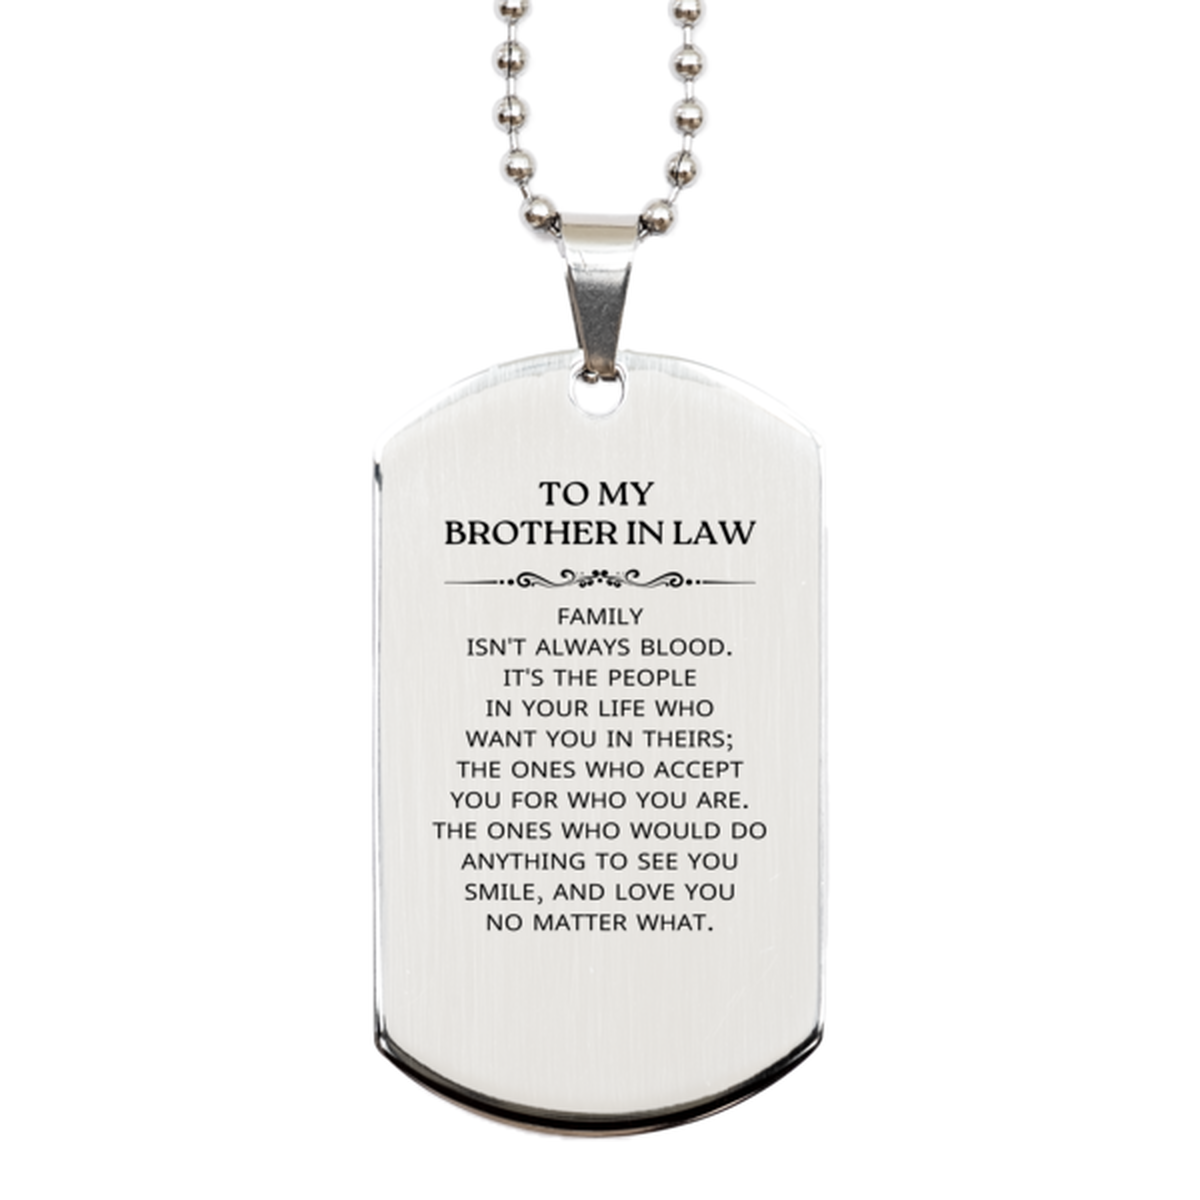 To My Brother In Law Gifts, Family isn't always blood, Brother In Law Silver Dog Tag, Birthday Christmas Unique Present For Brother In Law